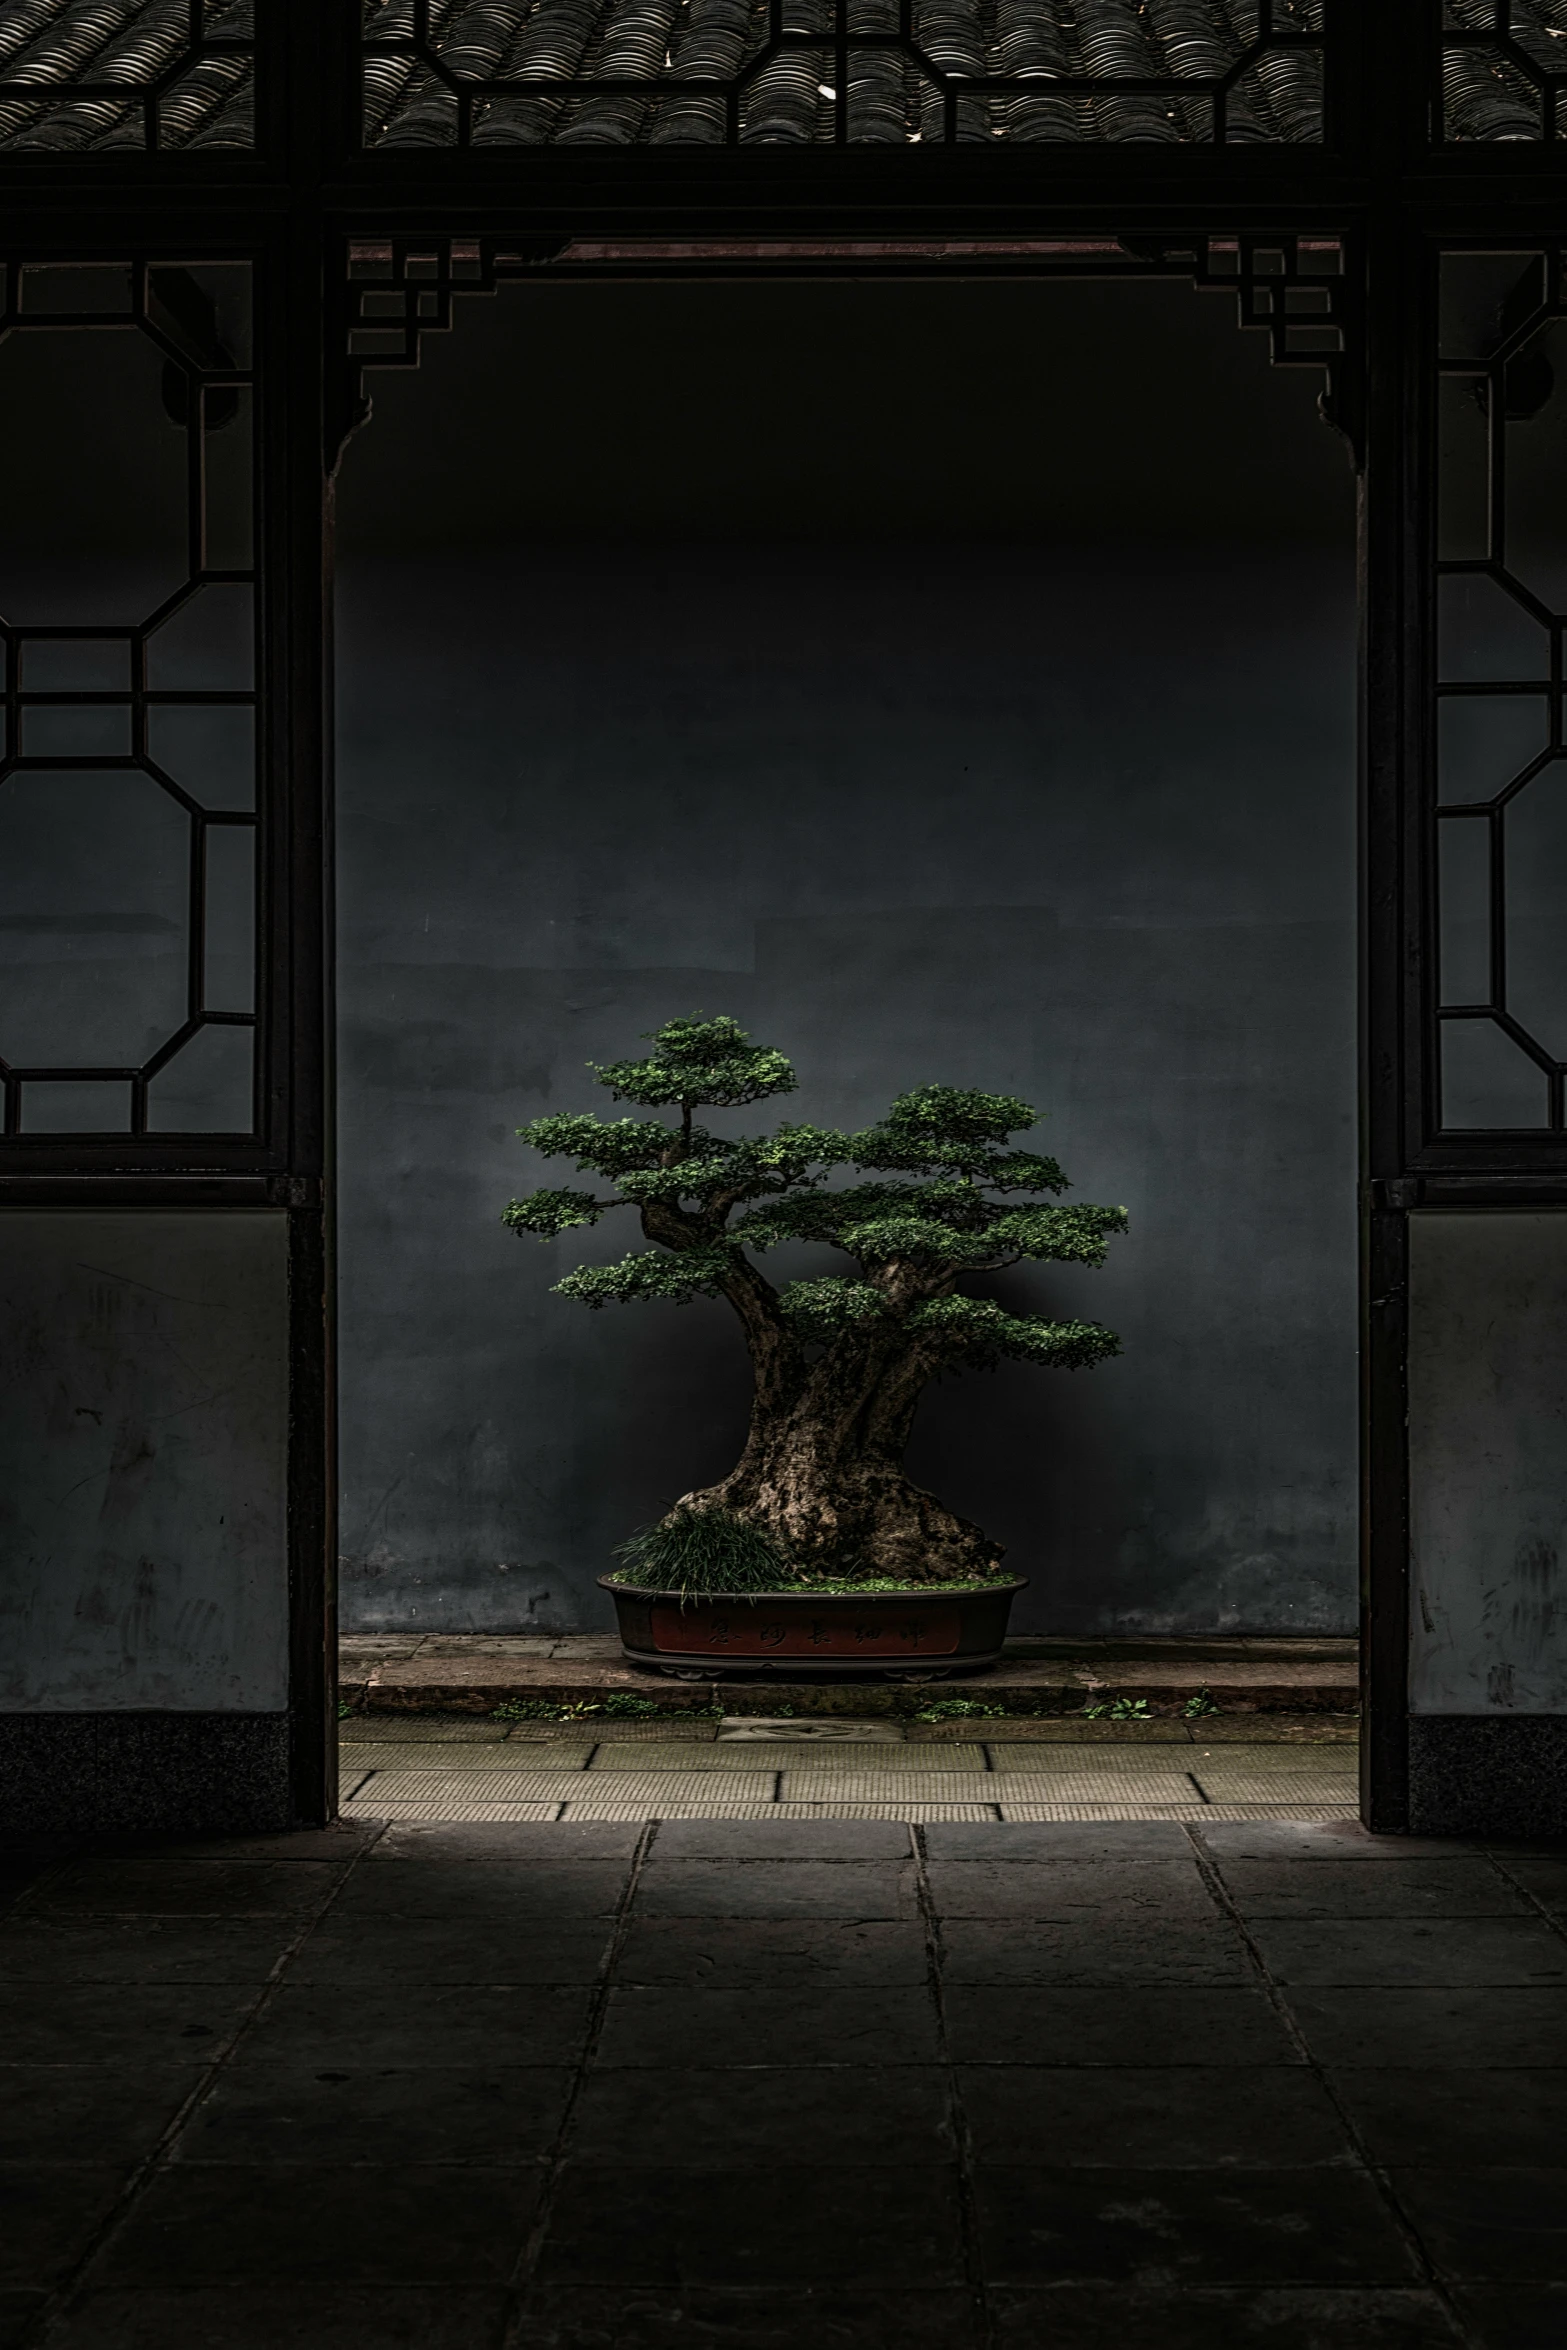 a bonsai tree on display in a stone courtyard